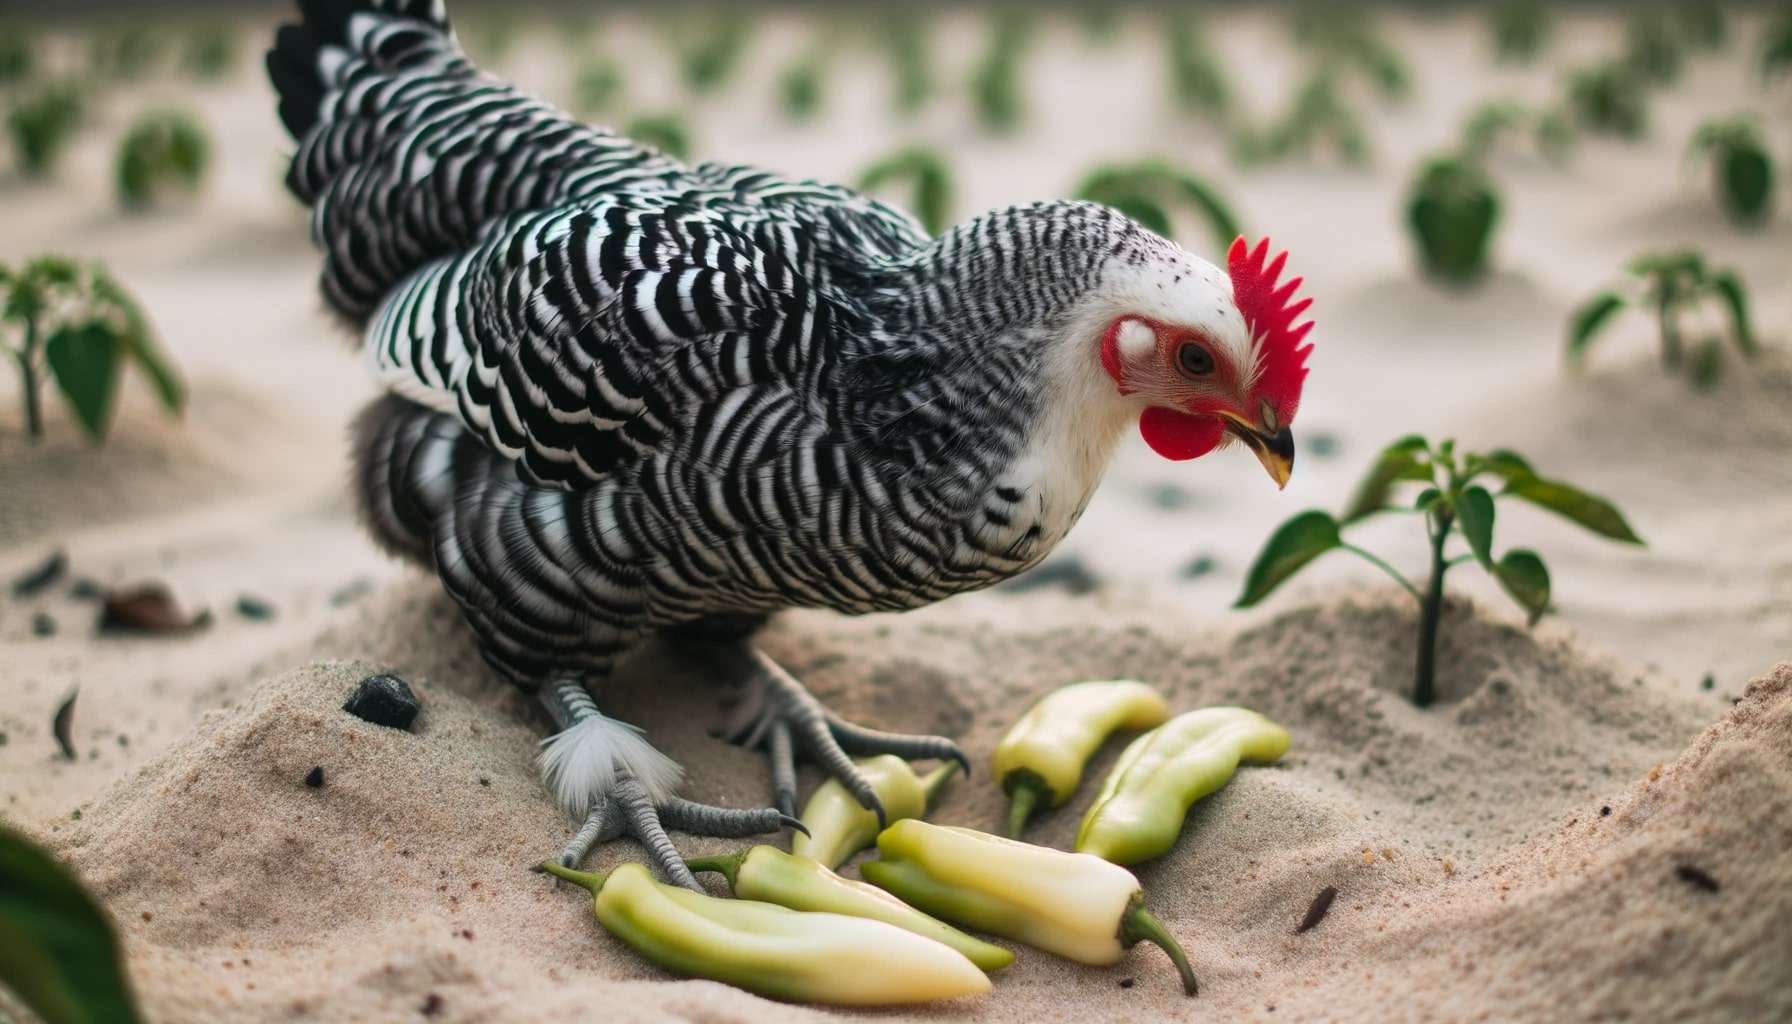 a chicken on dirt ground pecking at a cluster of banana peppers lying in front of it.